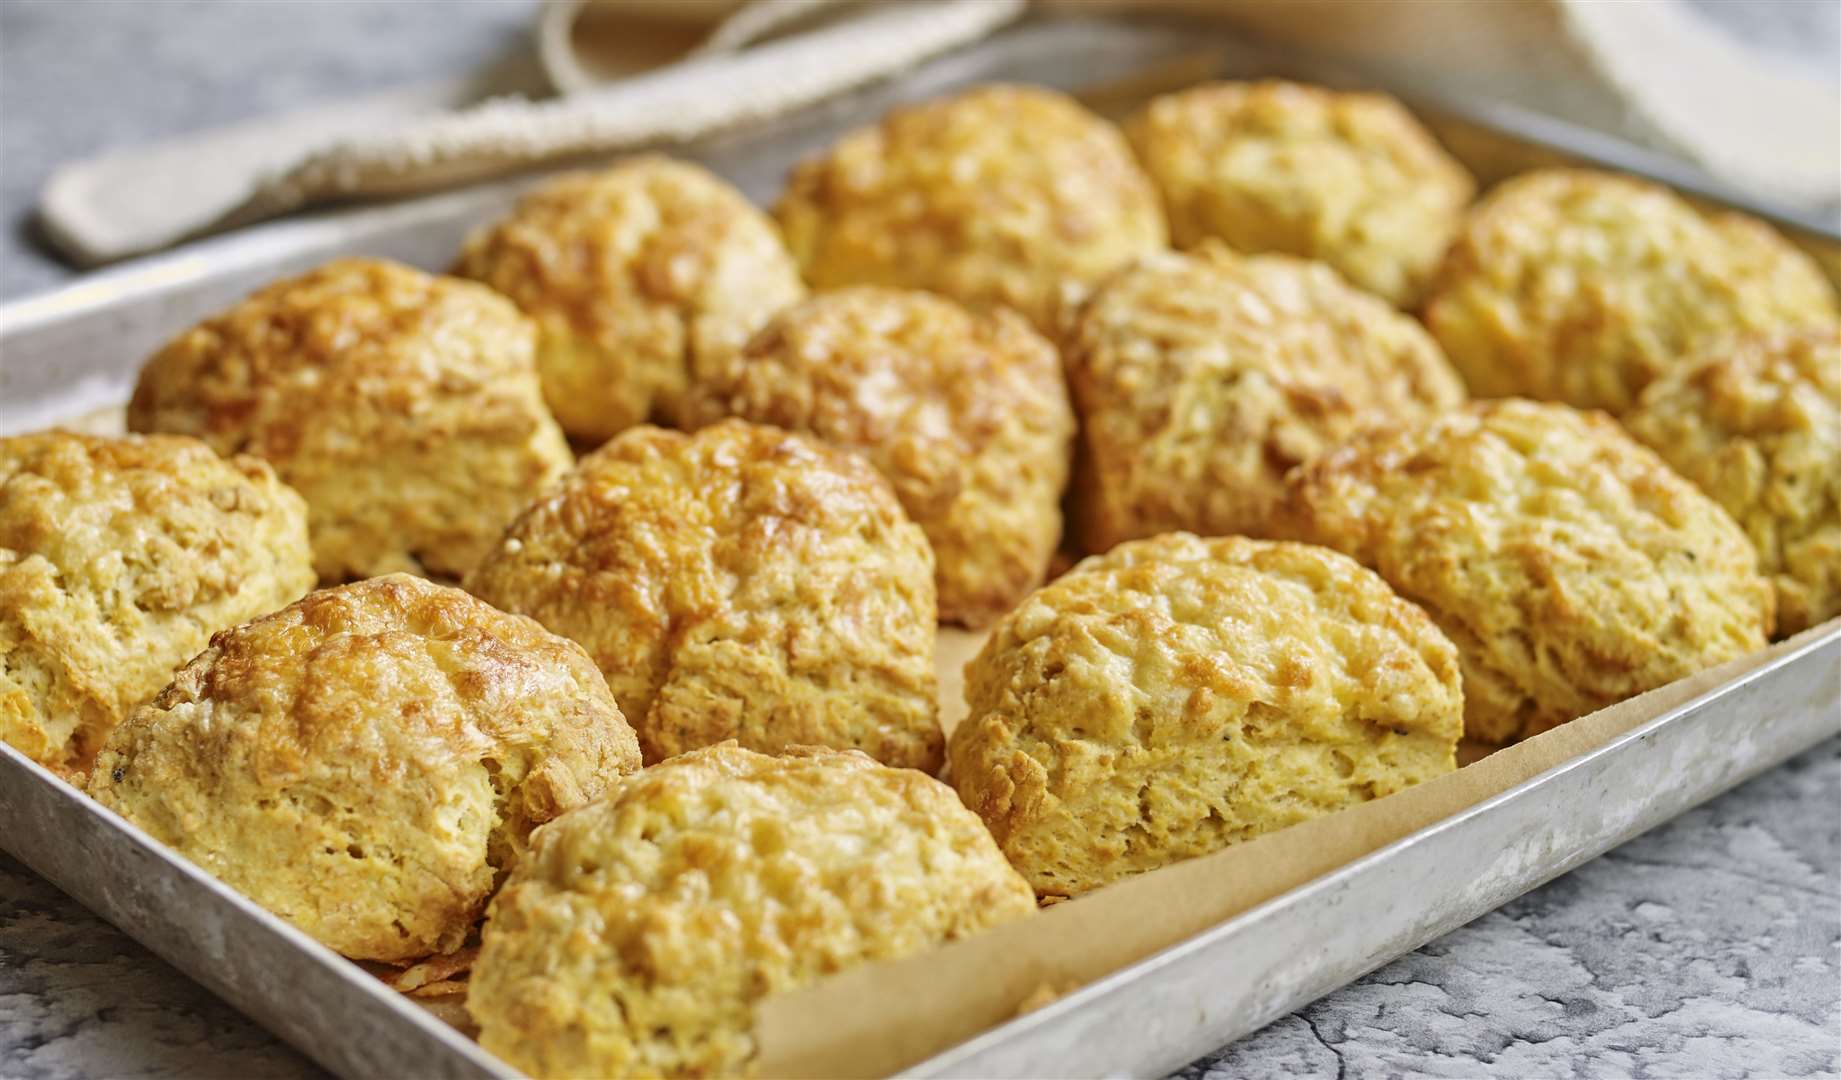 Cheese scones are popular on the National Trust's recipe page Picture: National Trust Images/William Shaw